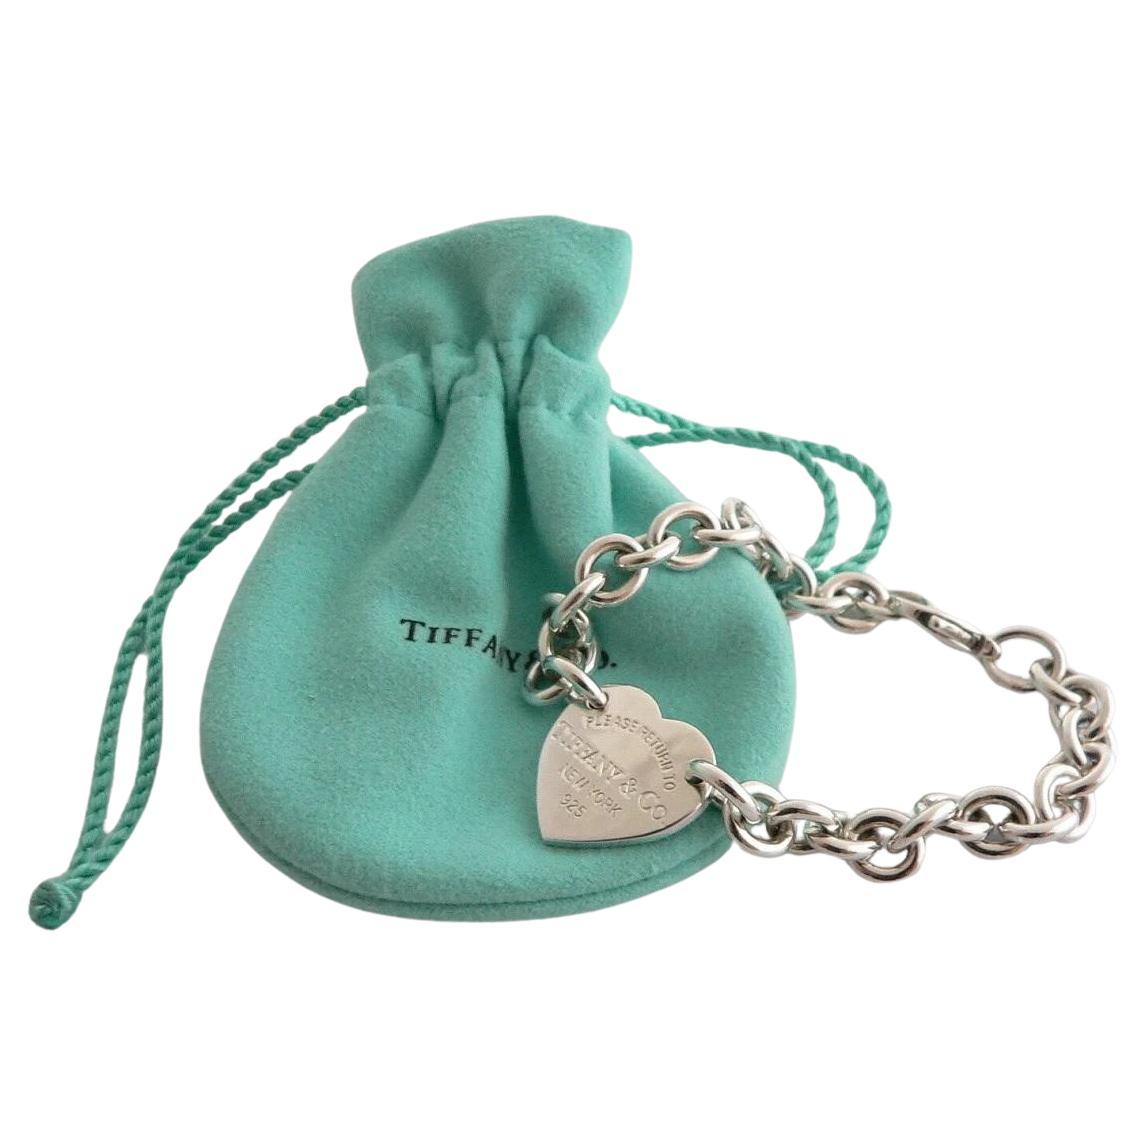 Return to Tiffany & co  Heart Tag Charm Bracelet in Silver For Sale